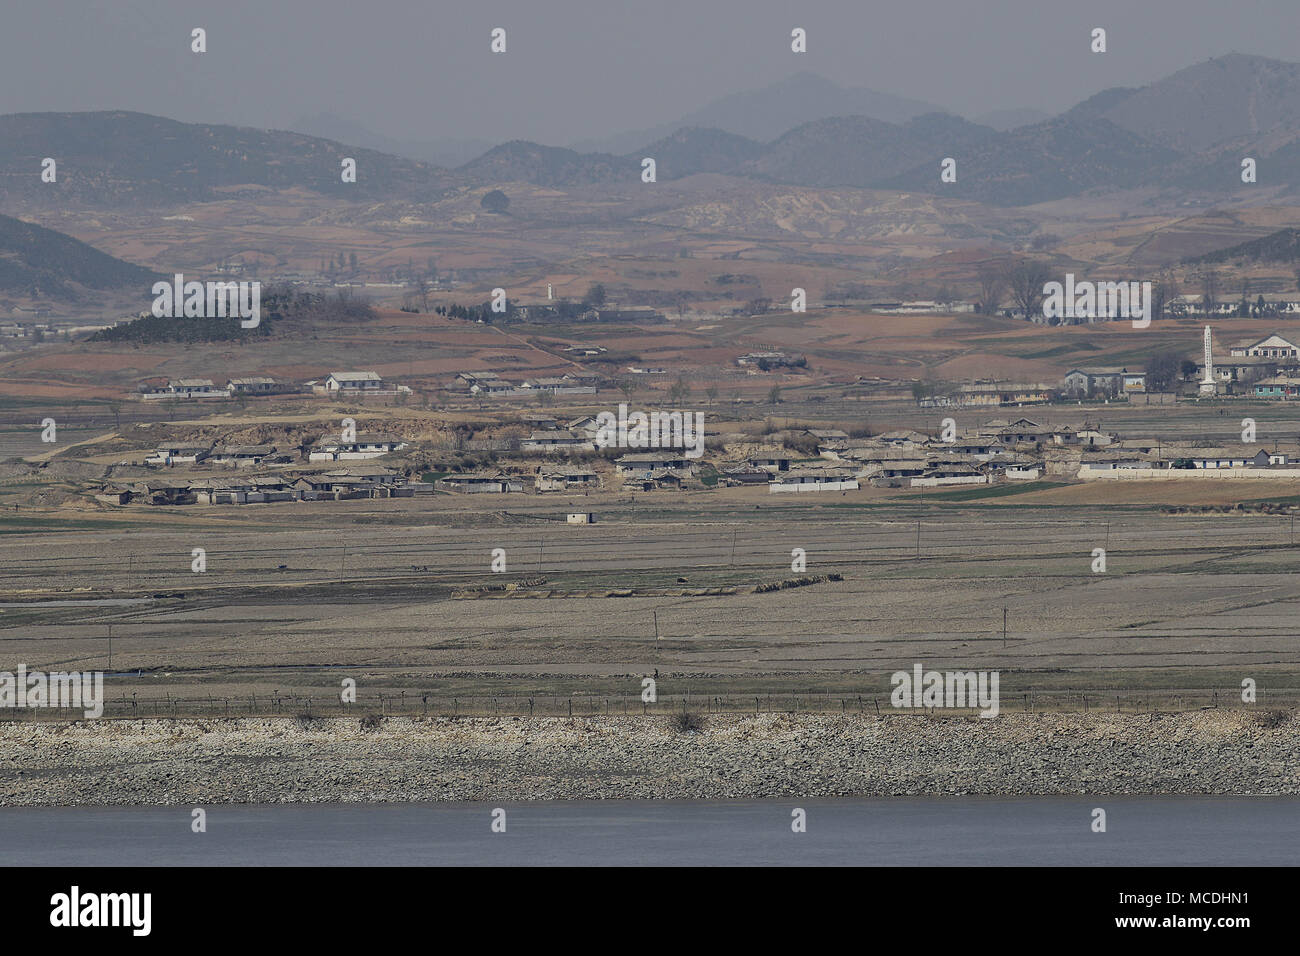 Ganghwa Island, INCHEON, SOUTH KOREA. 16th Apr, 2018. April 16, 2018-Ganghwa Island, South Korea-A View of North Korea Hwanghae Province One Village. View from Ganghwa Island border village. North Korean people are actively preparing for spring farming. The agenda for the third inter-Korean summit scheduled for April 27 is unlikely to have North Korean human rights issues despite calls for the inclusion by more than 200 NGOs earlier this week. Credit: Ryu Seung-Il/ZUMA Wire/Alamy Live News Stock Photo